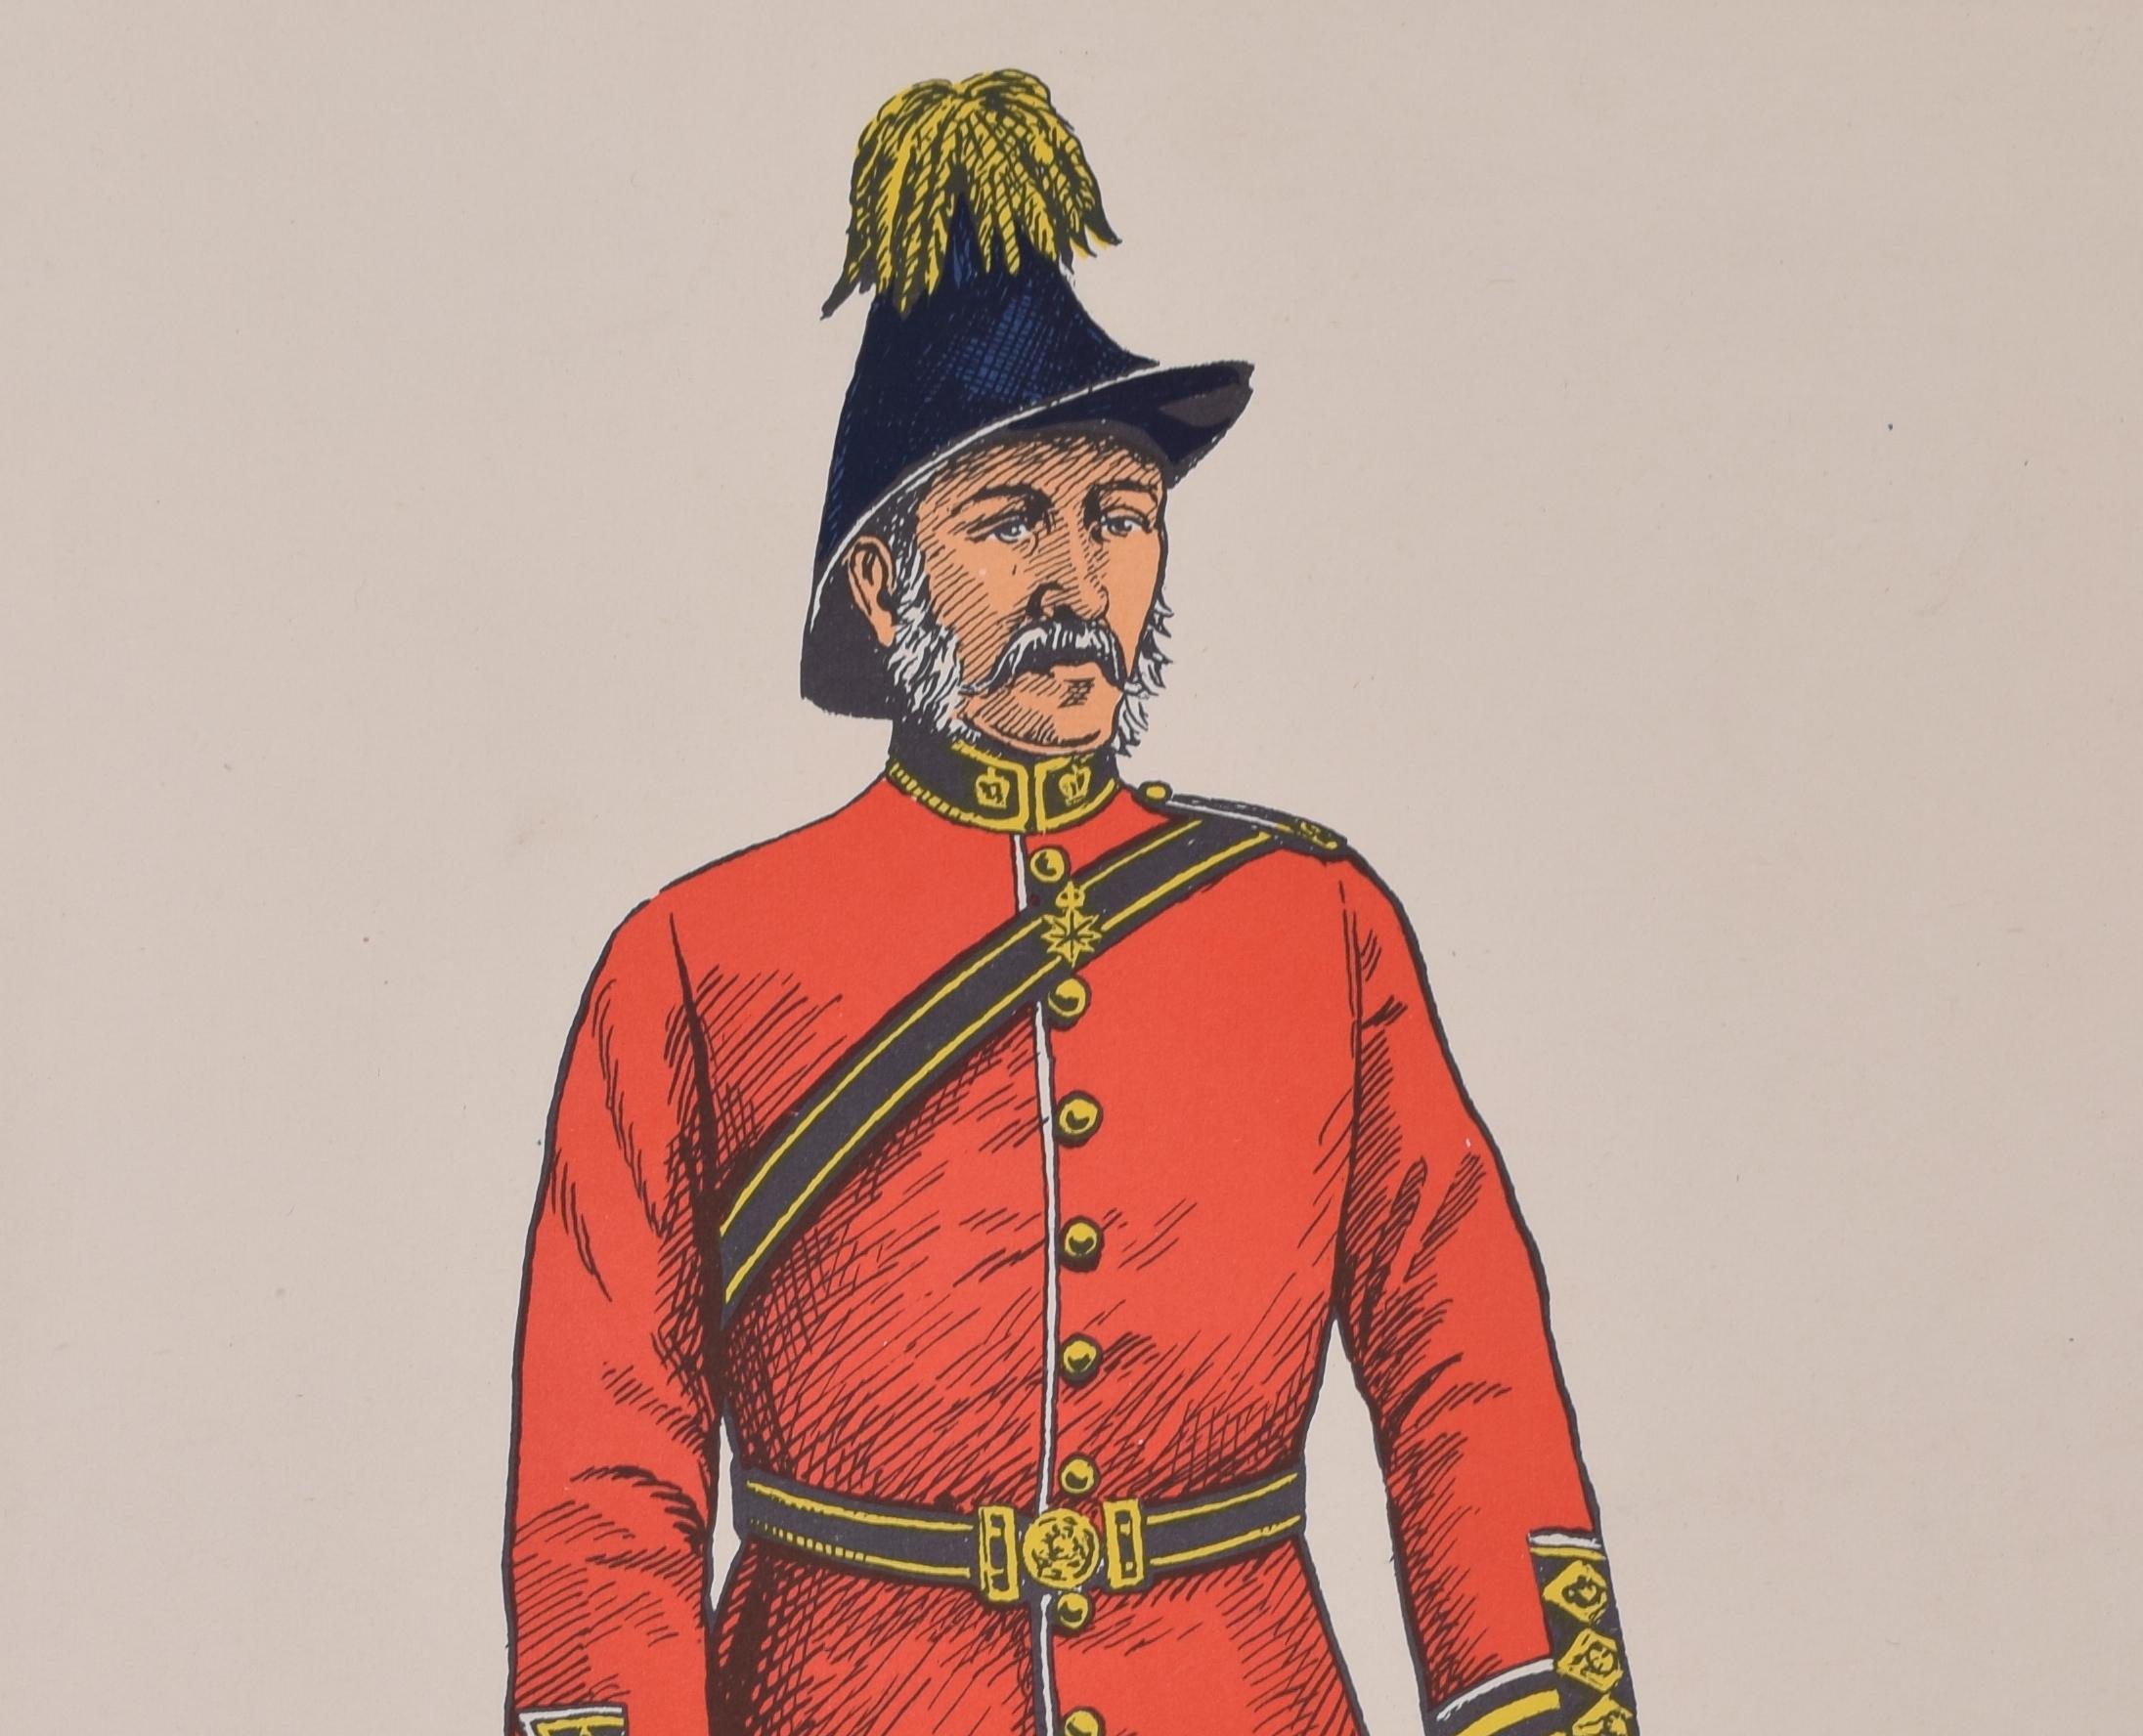 9th Queen's Royal Lancers Officer Institute of Army Education Uniform-Lithographie – Print von Unknown